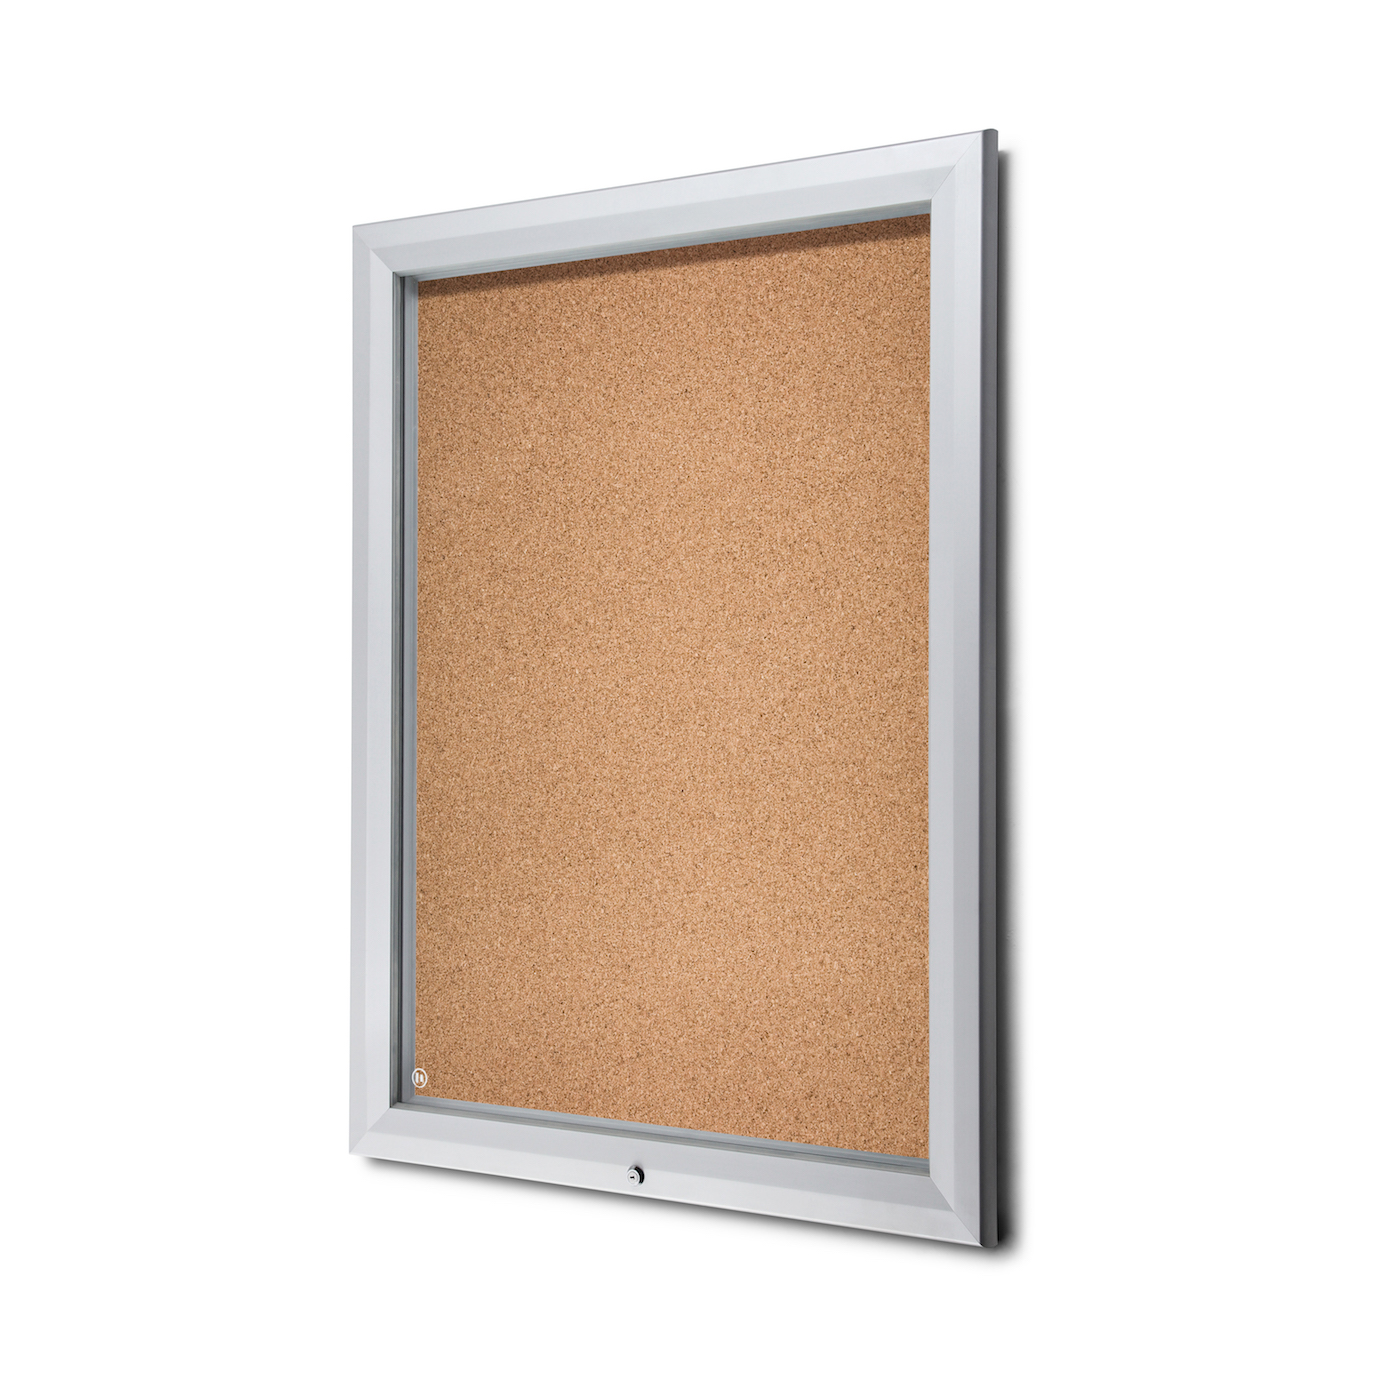 Bulletin Board | Outdoor | Cork Board | fits 9 pages | Locking